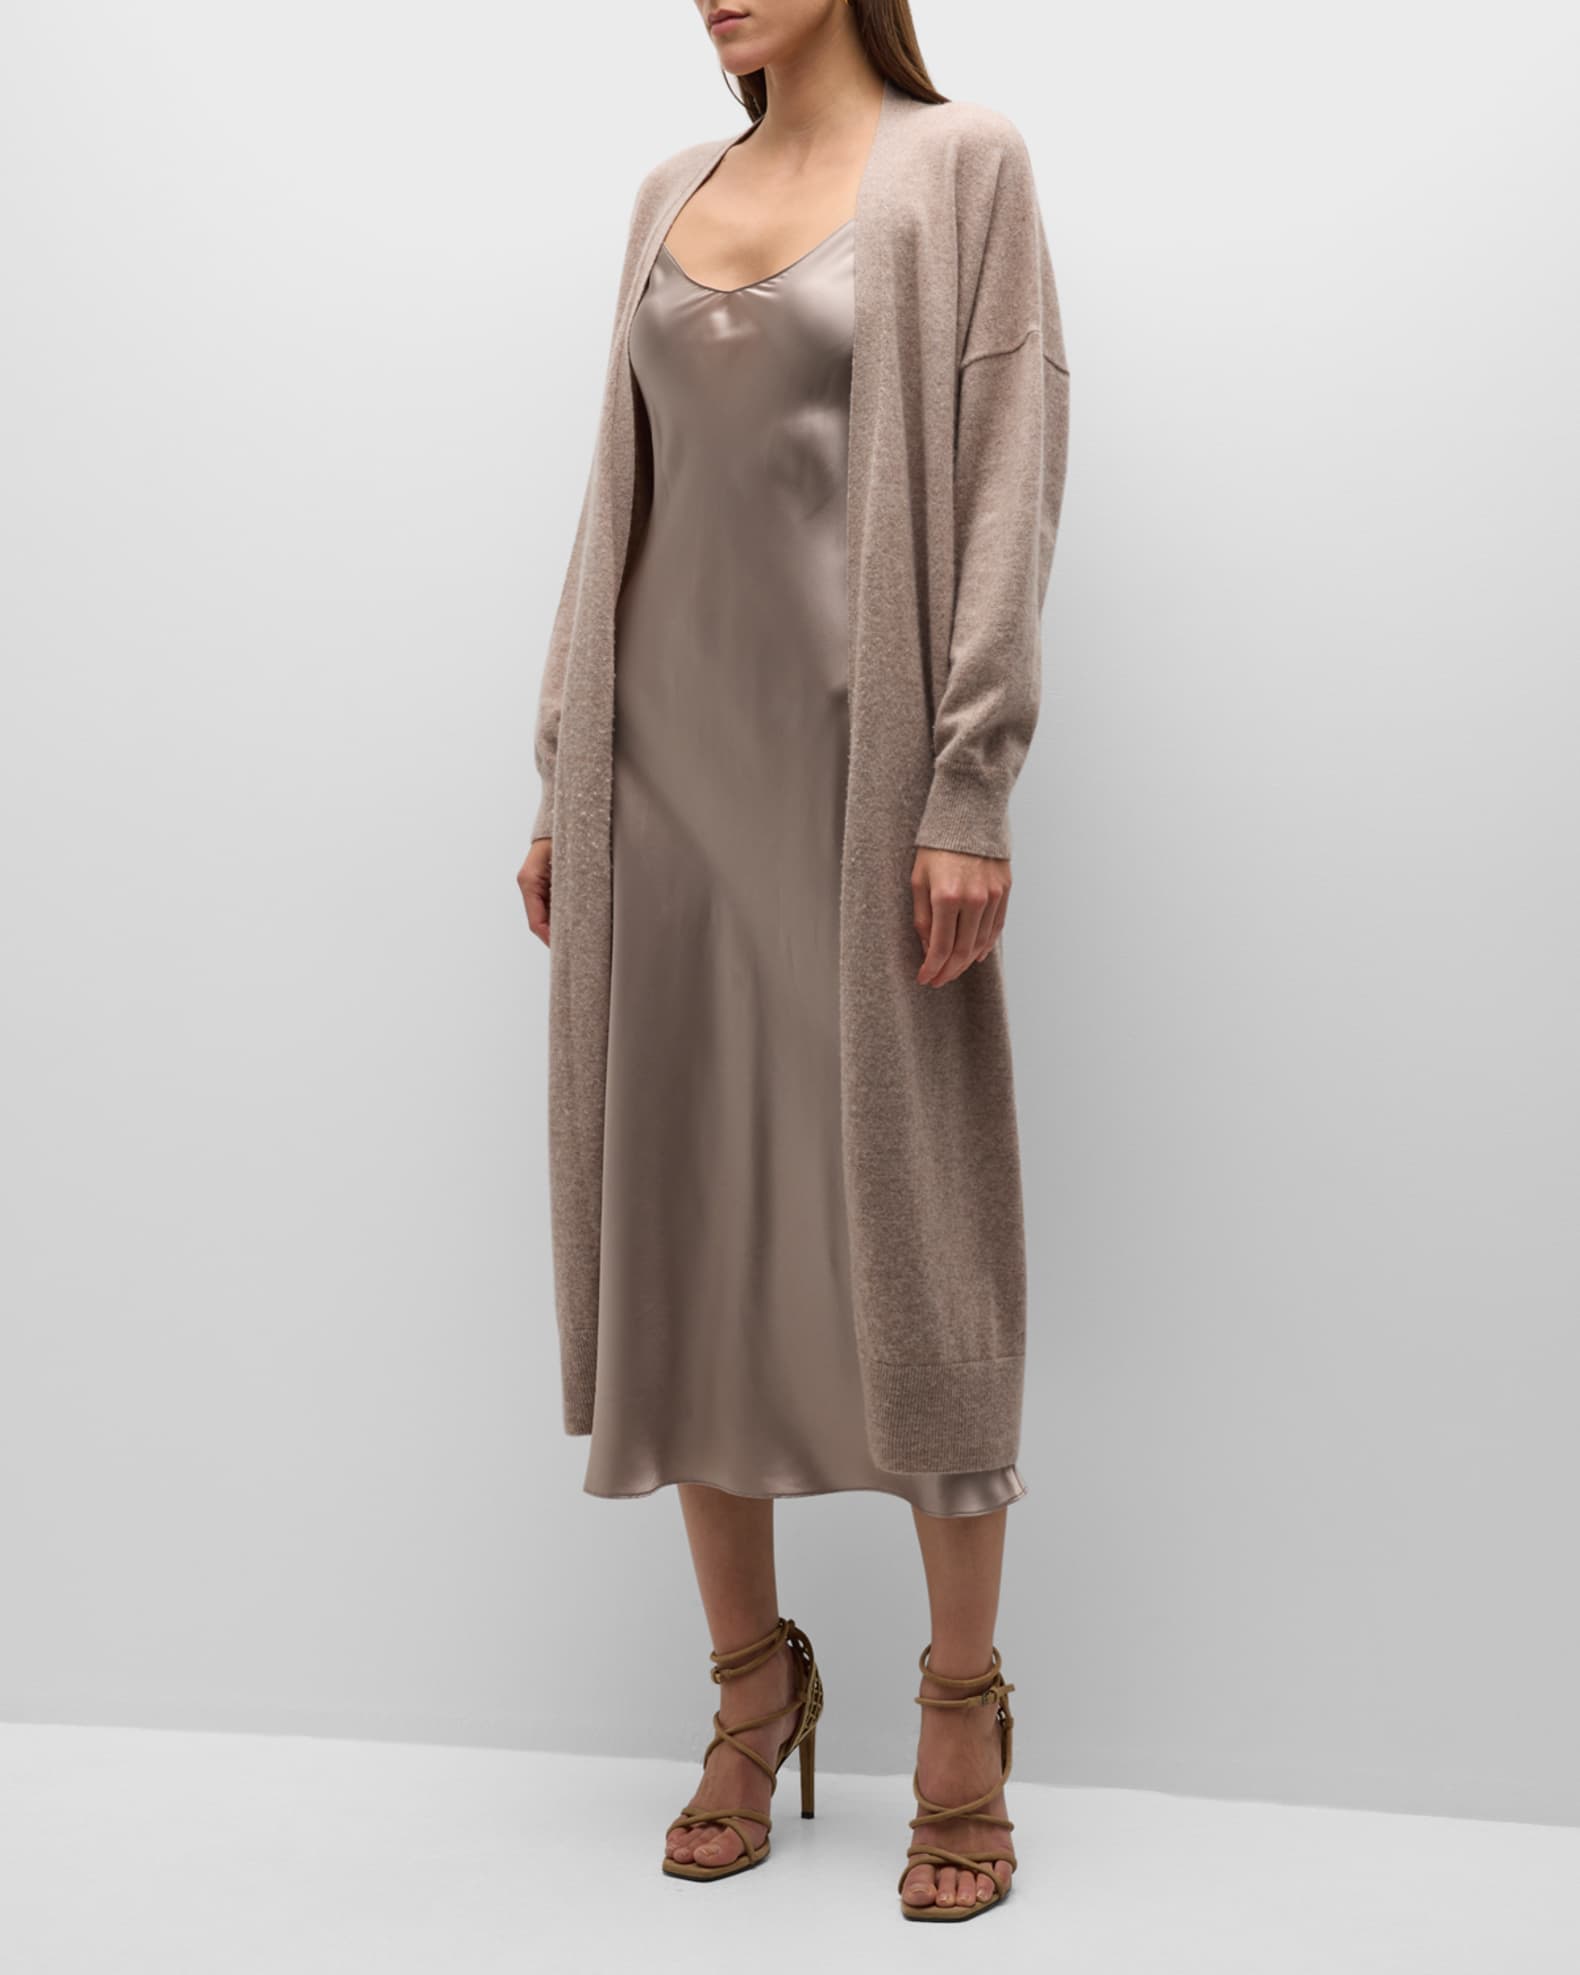 Sablyn Cashmere Duster | Neiman Marcus